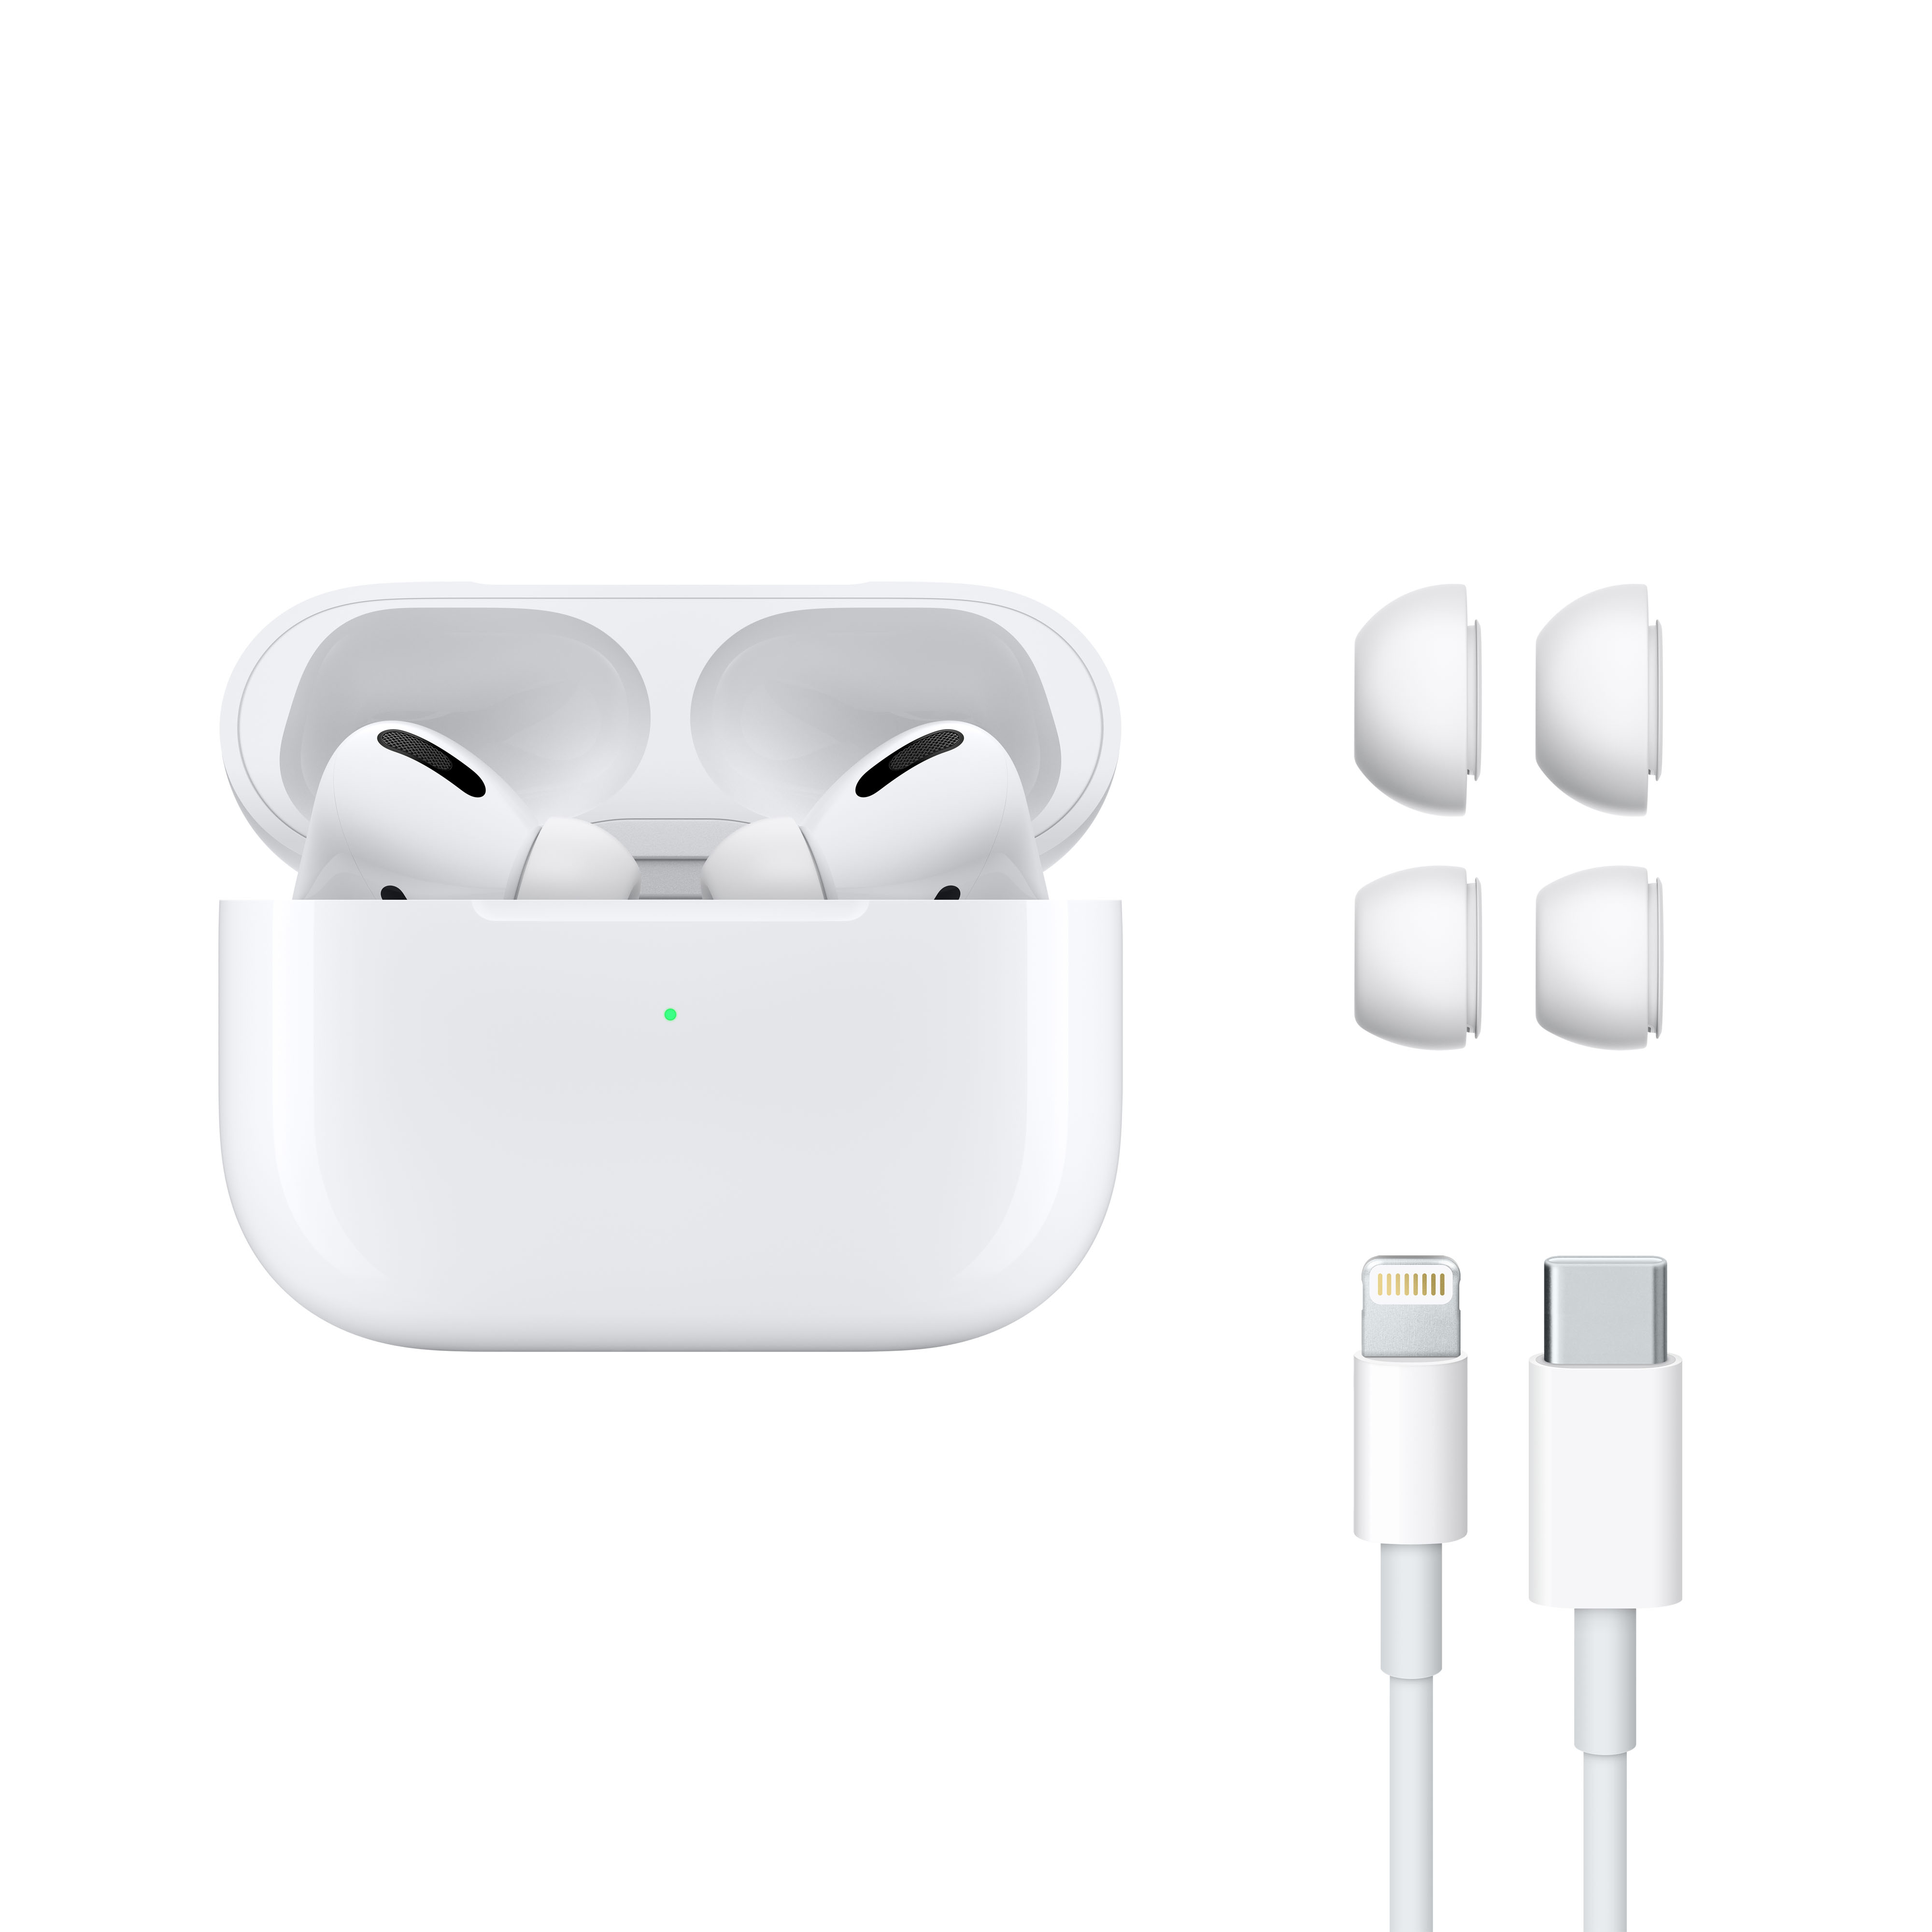 Apple AirPods Pro (1st Generation) - image 8 of 8